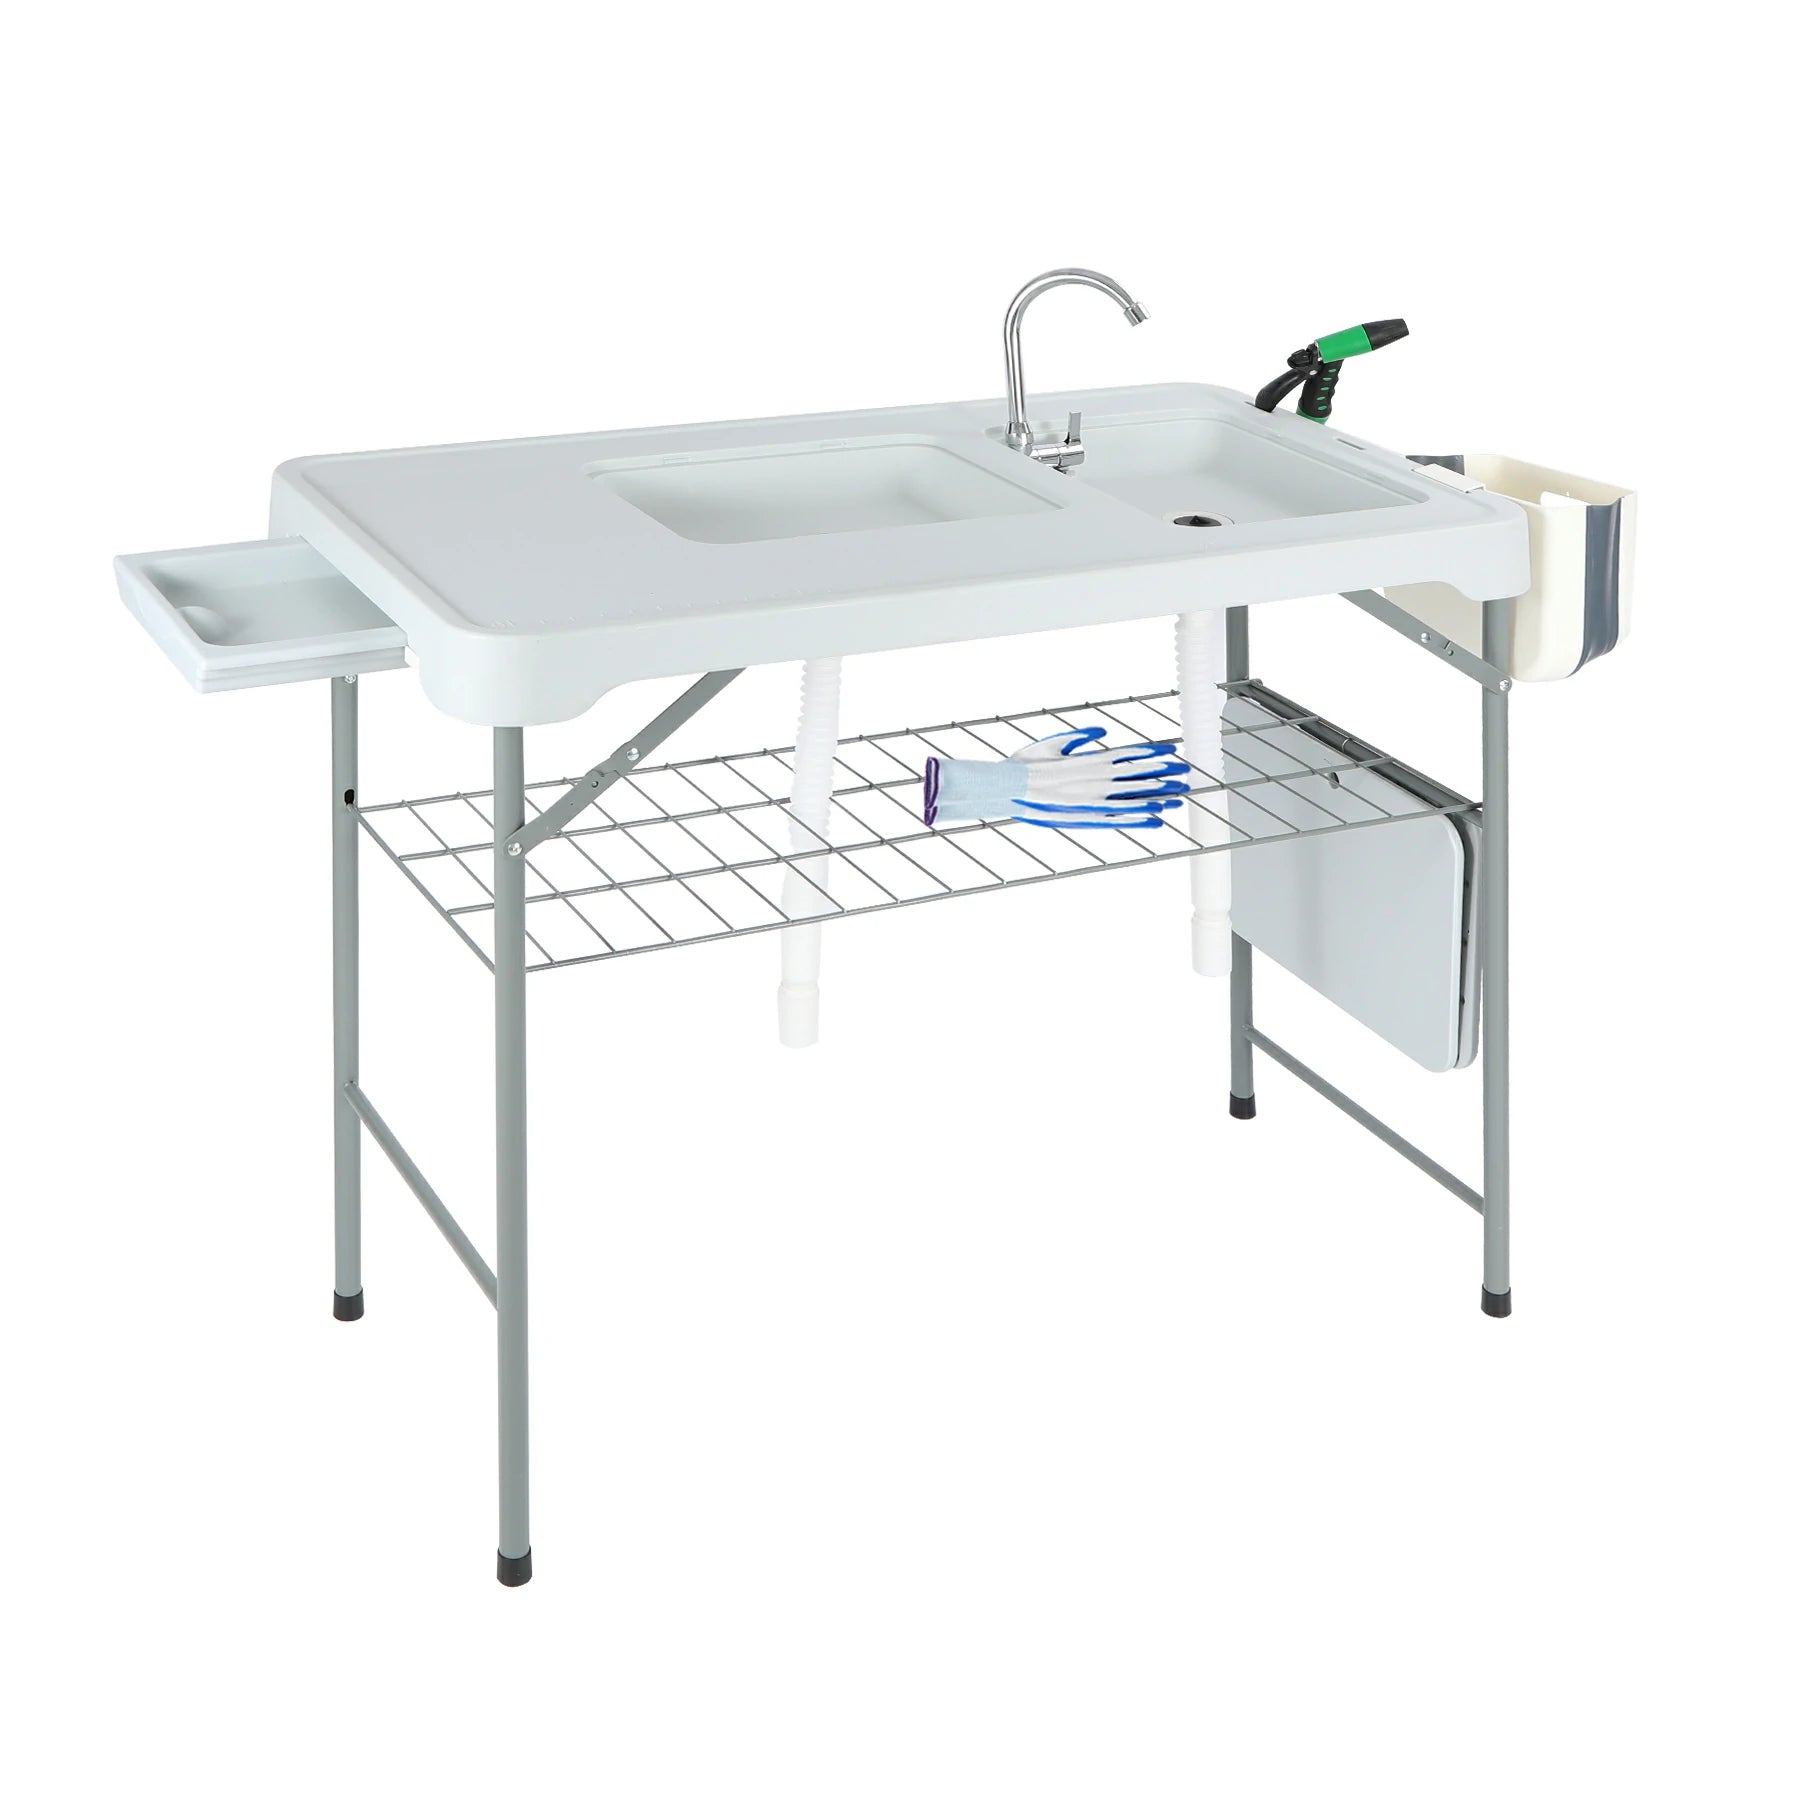 Portable Folding Fish Cleaning Table with Double Sink & Faucet